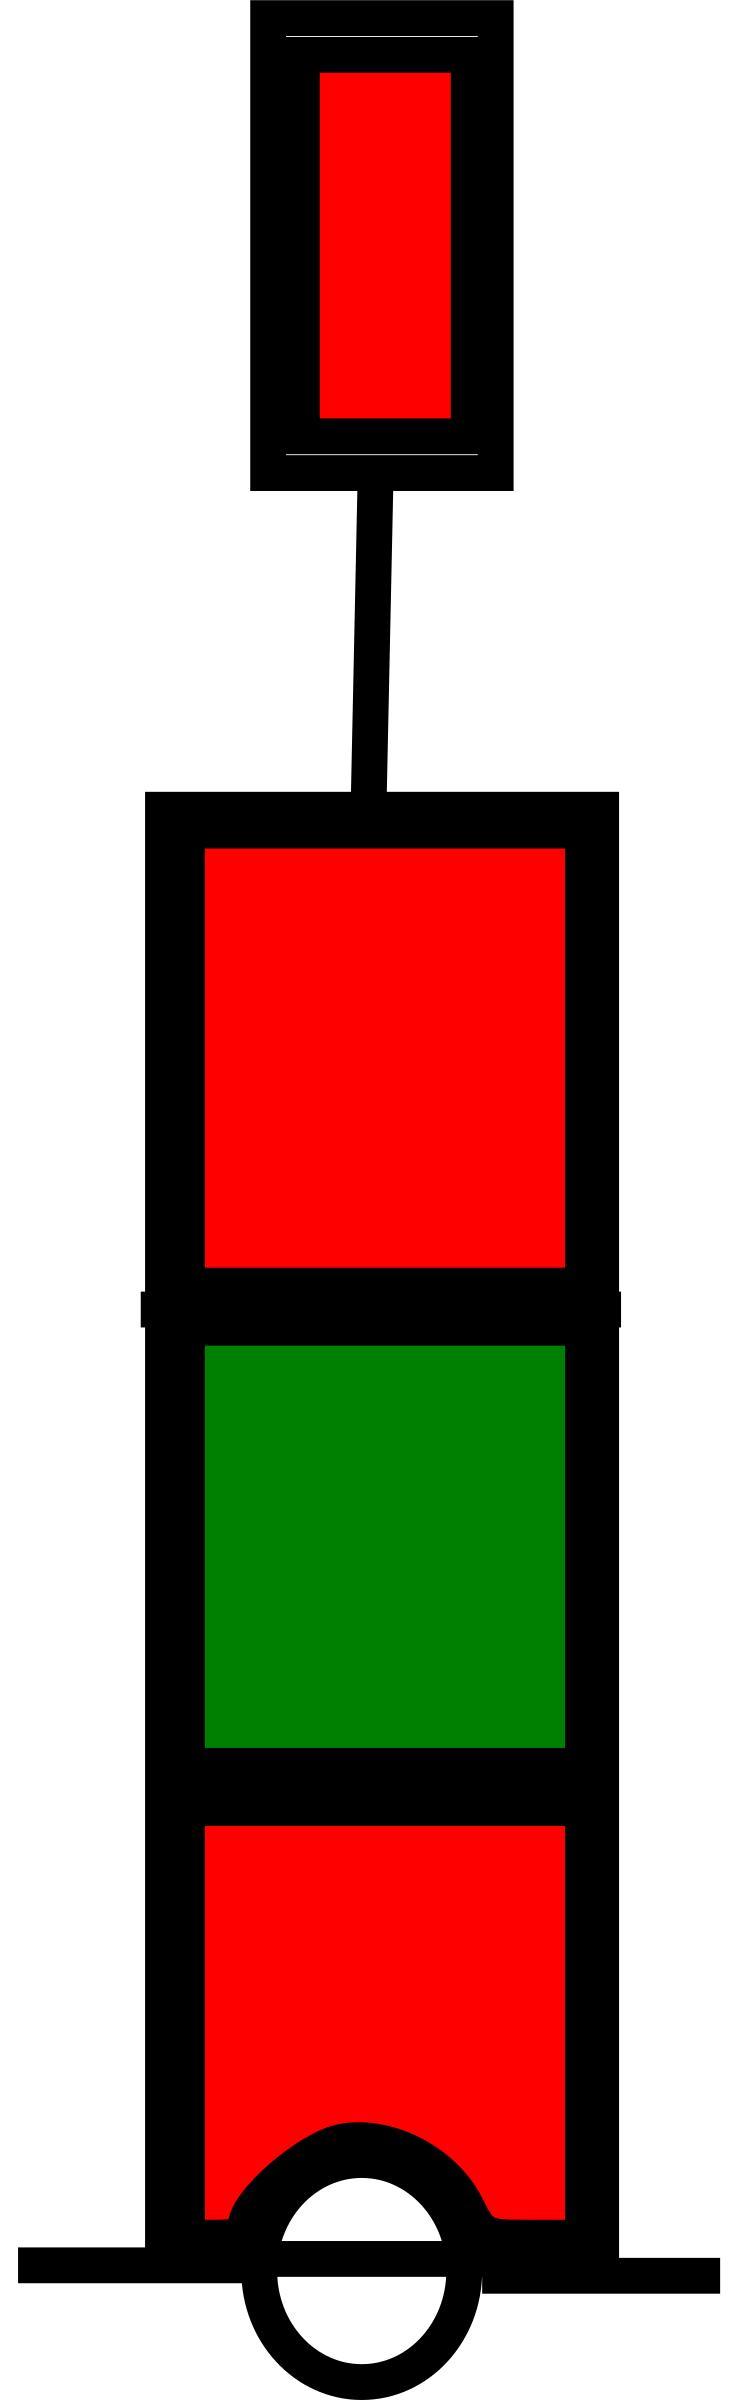 beacon red-green-red IALA A png transparent